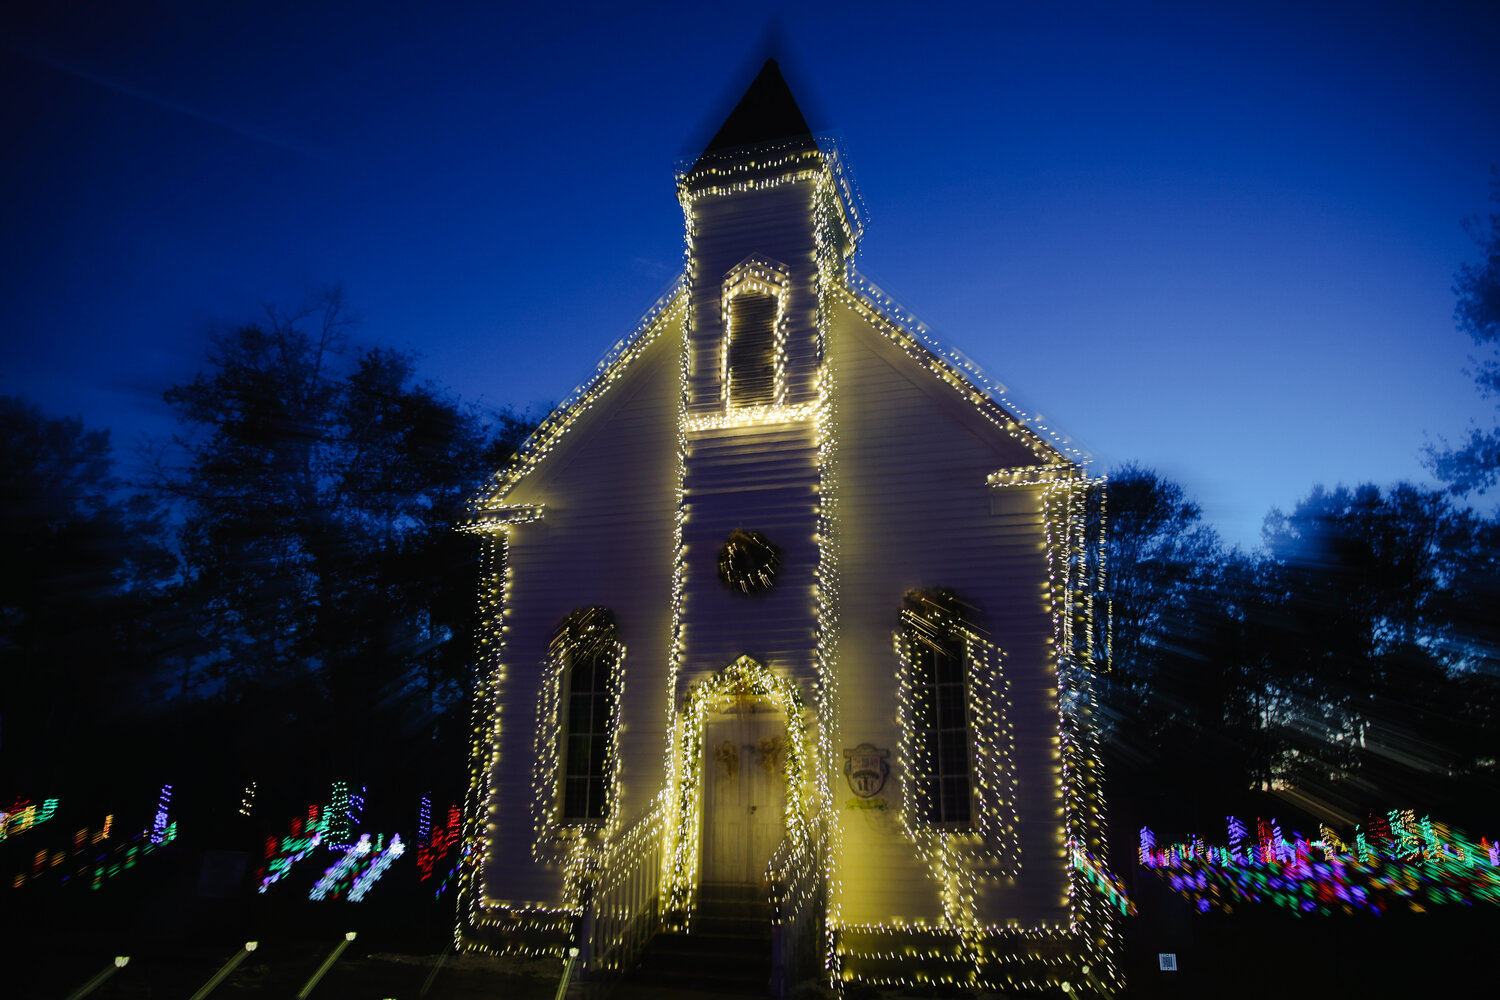 A chapel located at Bicentennial Park features lights wrapped all around it to illuminate the building, making it stand out among the colored Christmas tree lights.